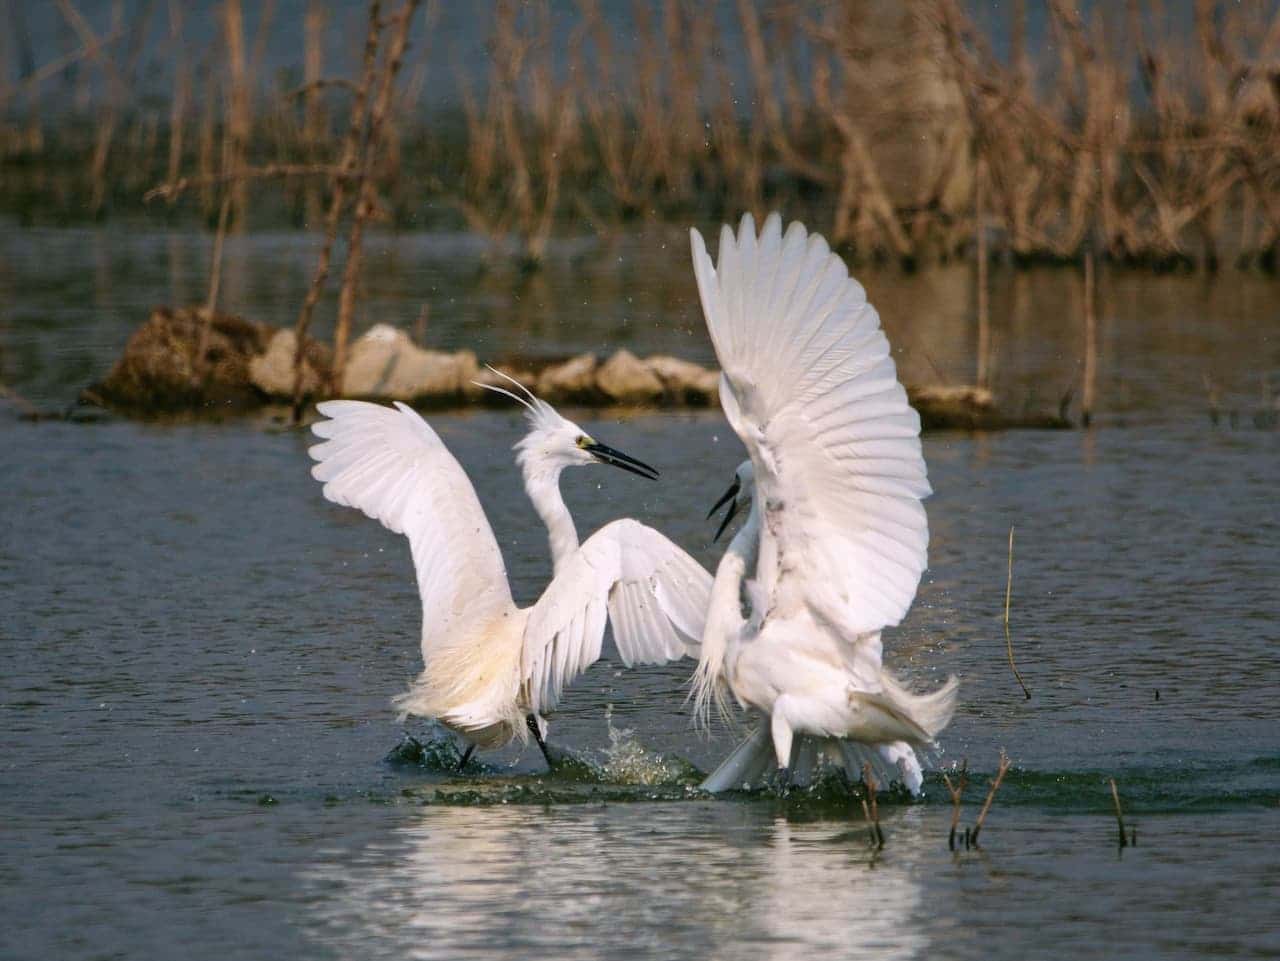 The Two Egrets Fighting Each Other